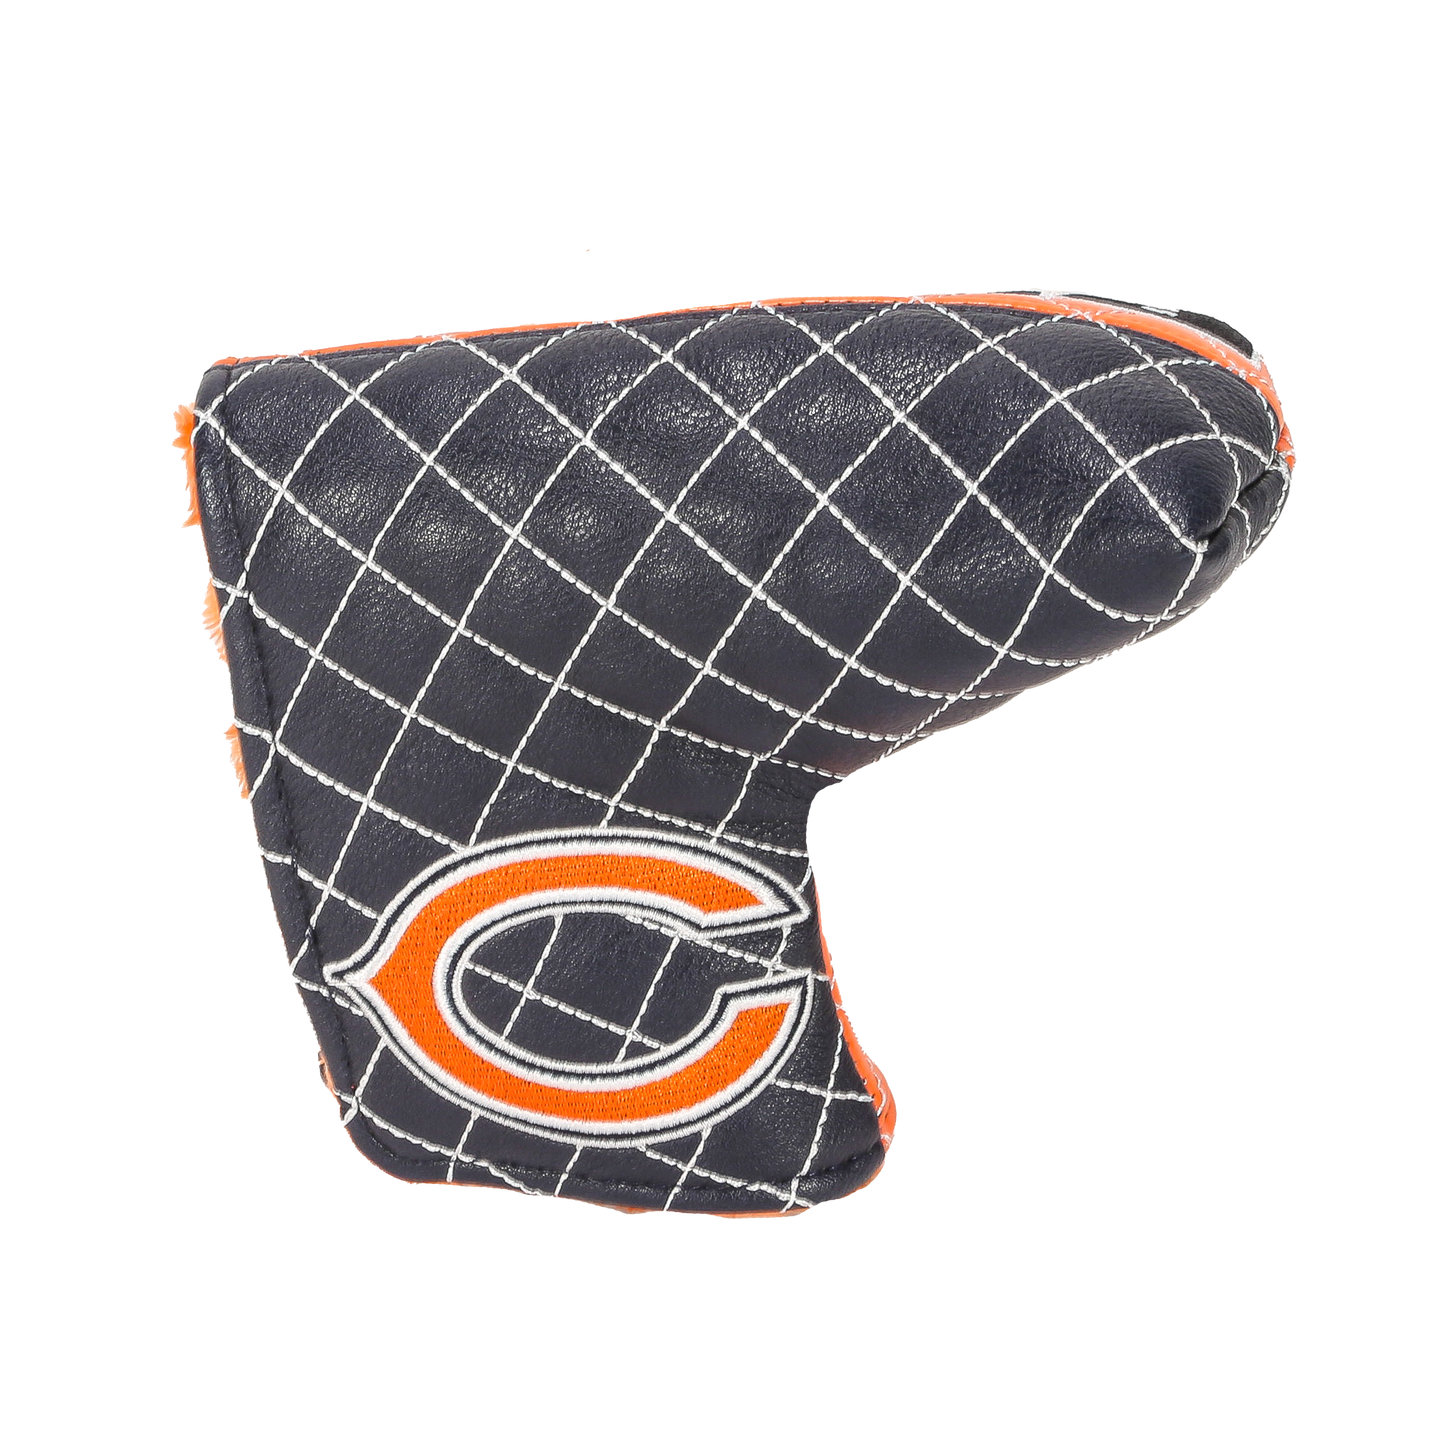 Chicago "Bears" Blade Putter Cover